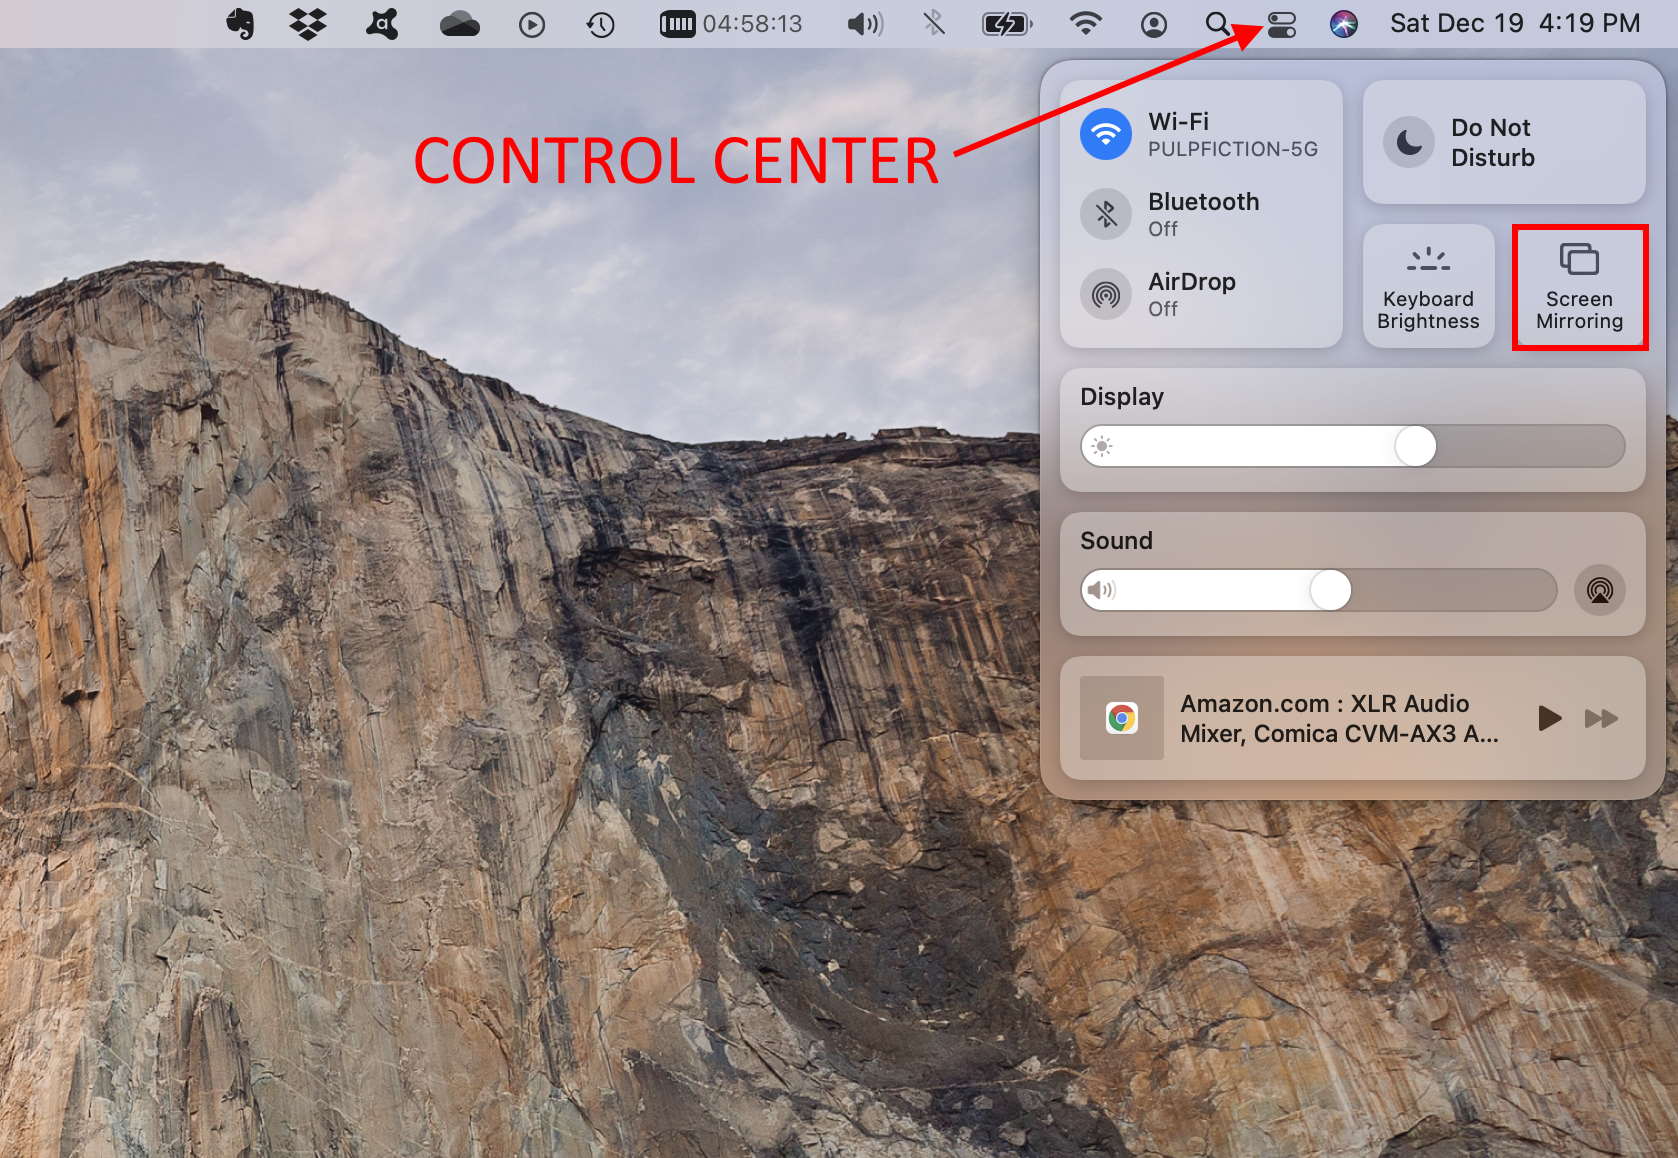 how to airplay from mac not mirror